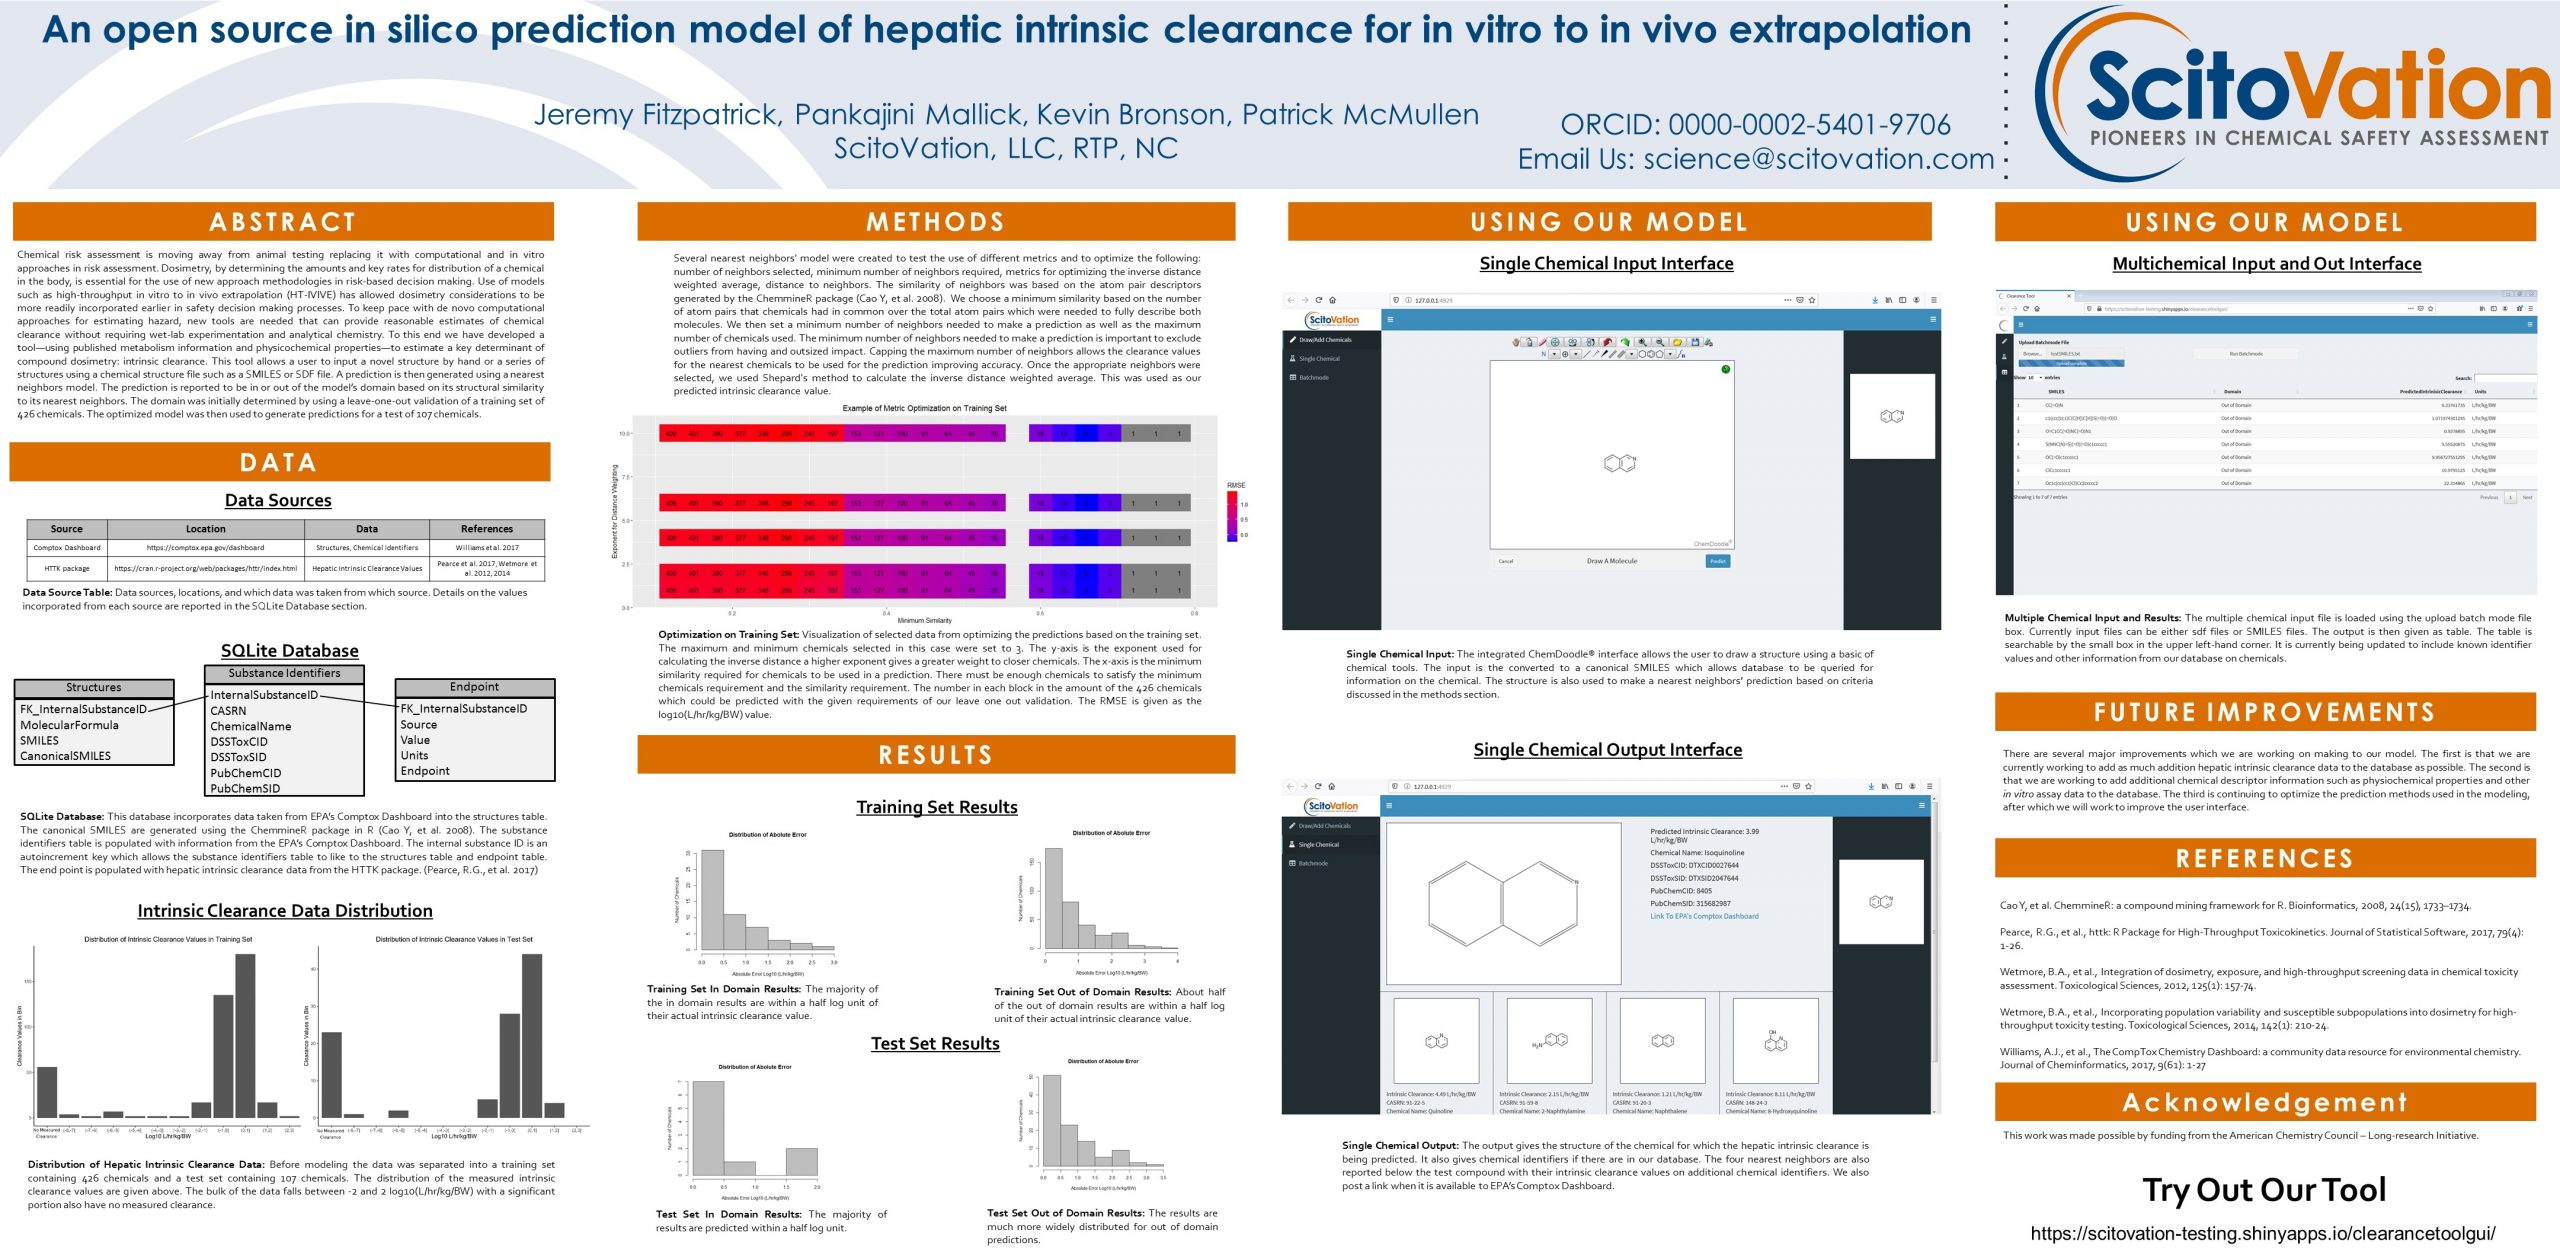 Featured image for “An Open Source in silico Prediction Model of Hepatic Intrinsic Clearance for in vitro to in vivo Extrapolation”